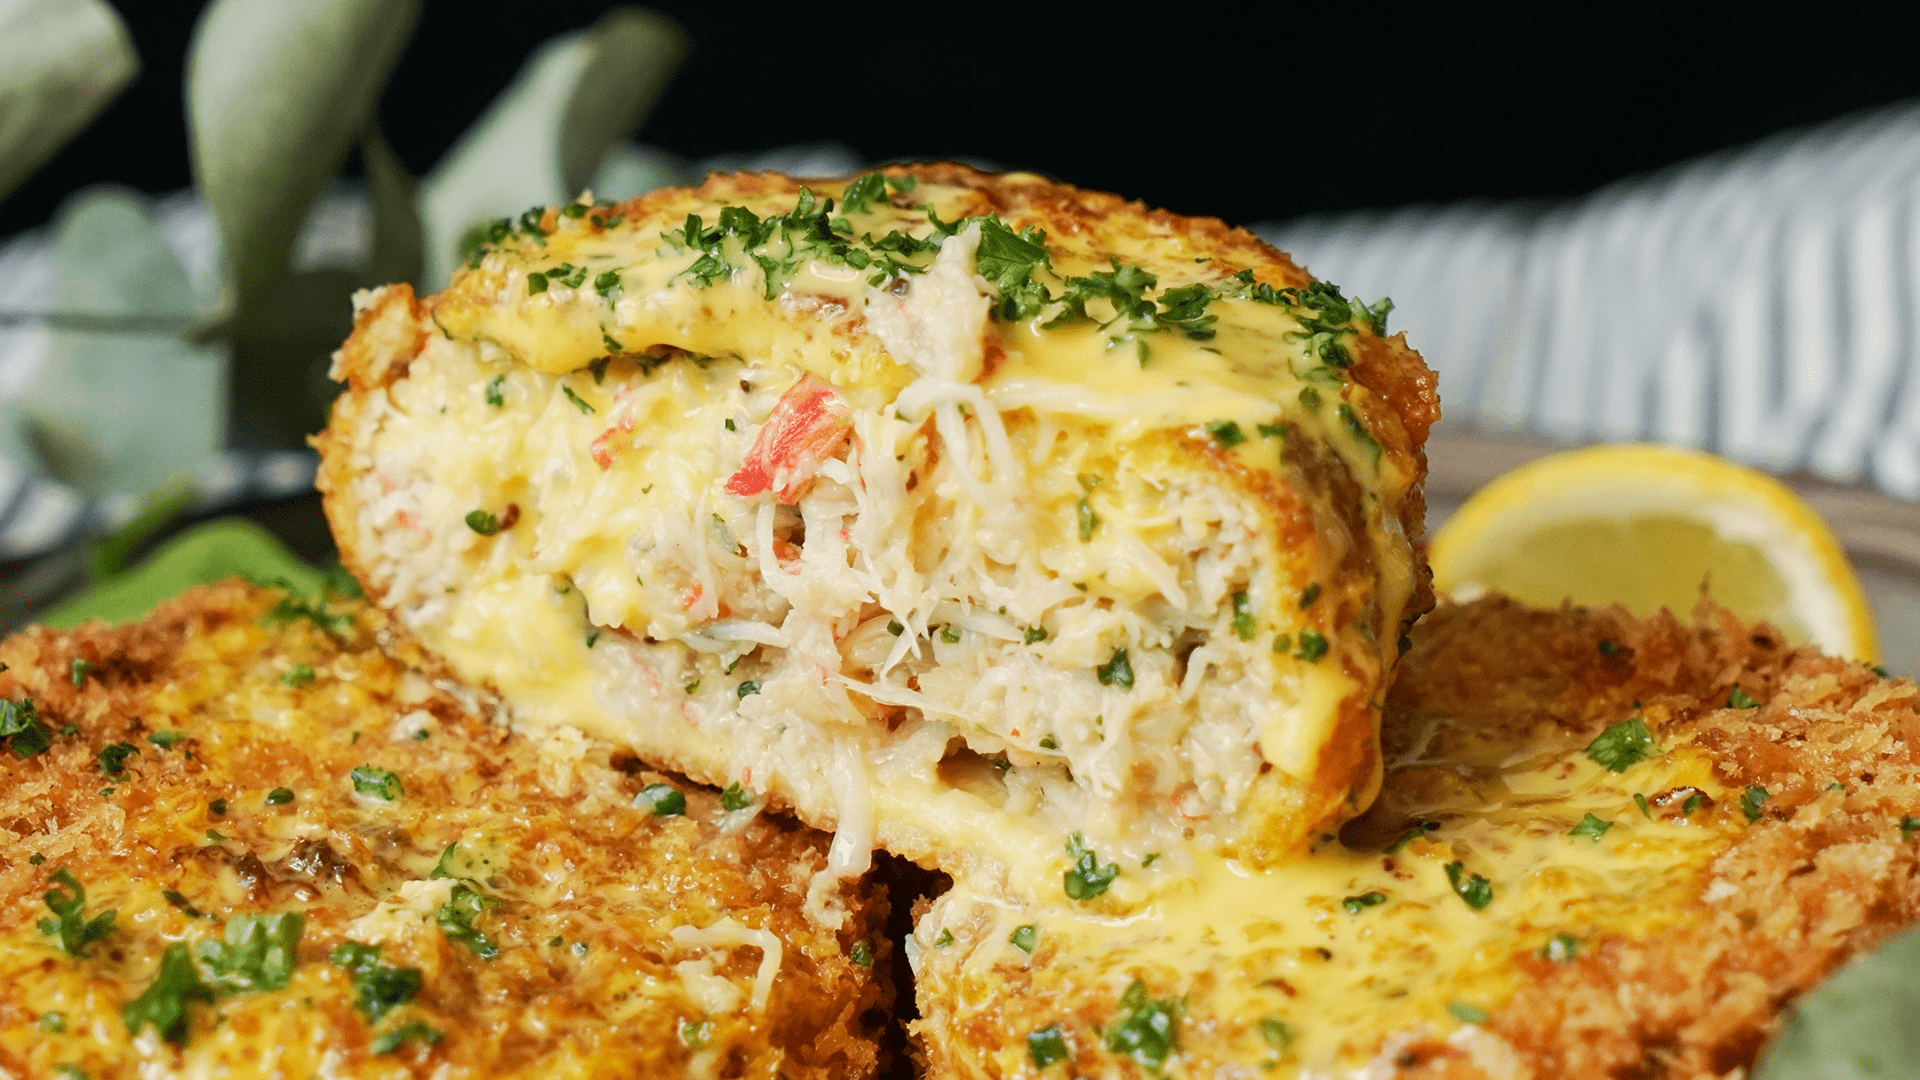 Craving a Taste of Maryland? Try This Authentic Crab Cake Recipe!